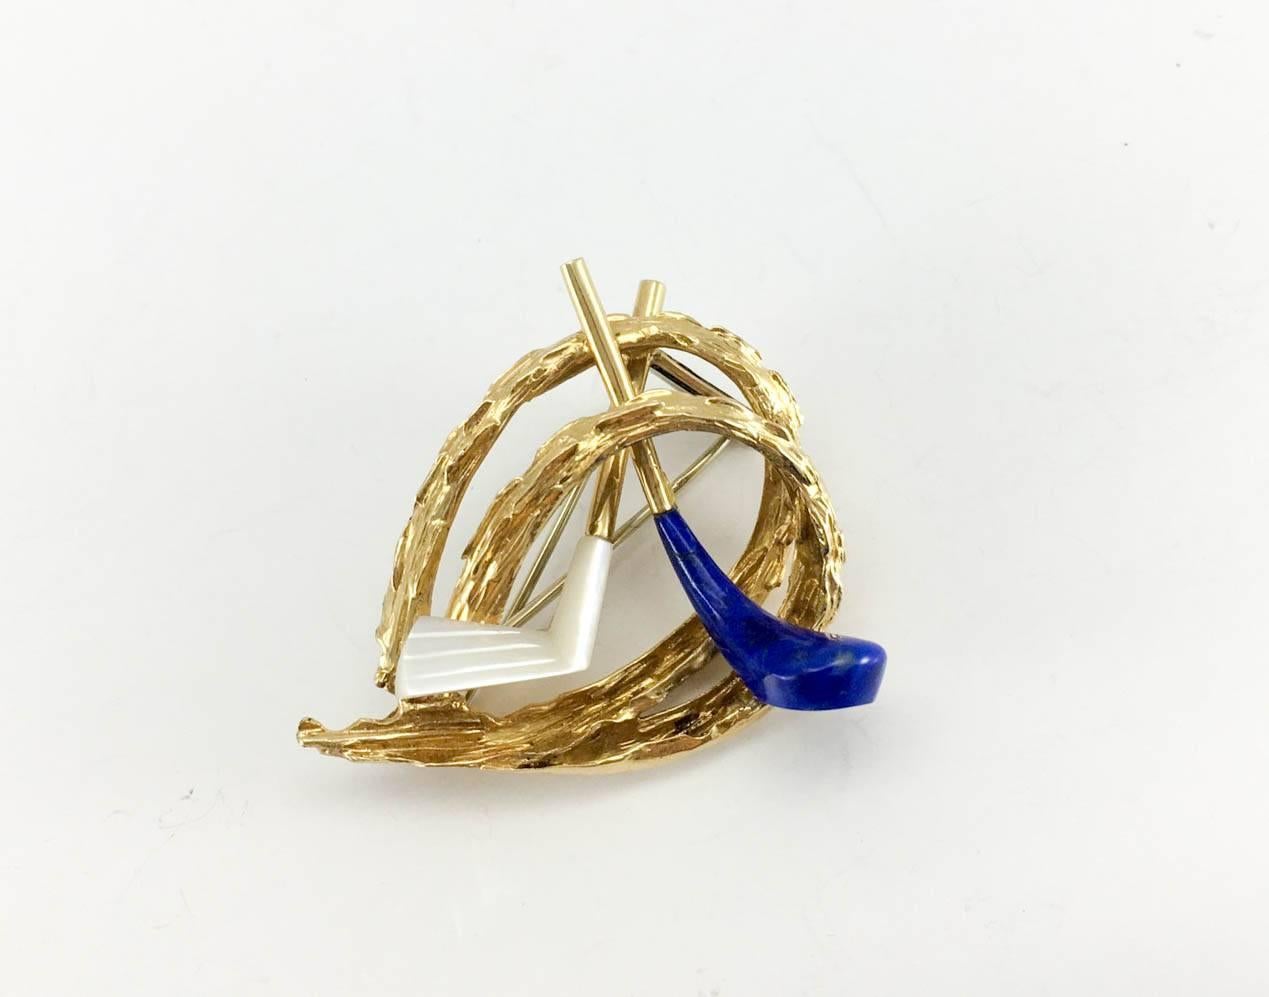 Exquisite Vintage Chaumet Golfing Brooch. This beautiful piece of jewellery by Chaumet dates back from the 1960s. Crafted in 18K gold, it consists of an organic design with two golf clubs in the centre, one with a lapis lazuli end and the other with